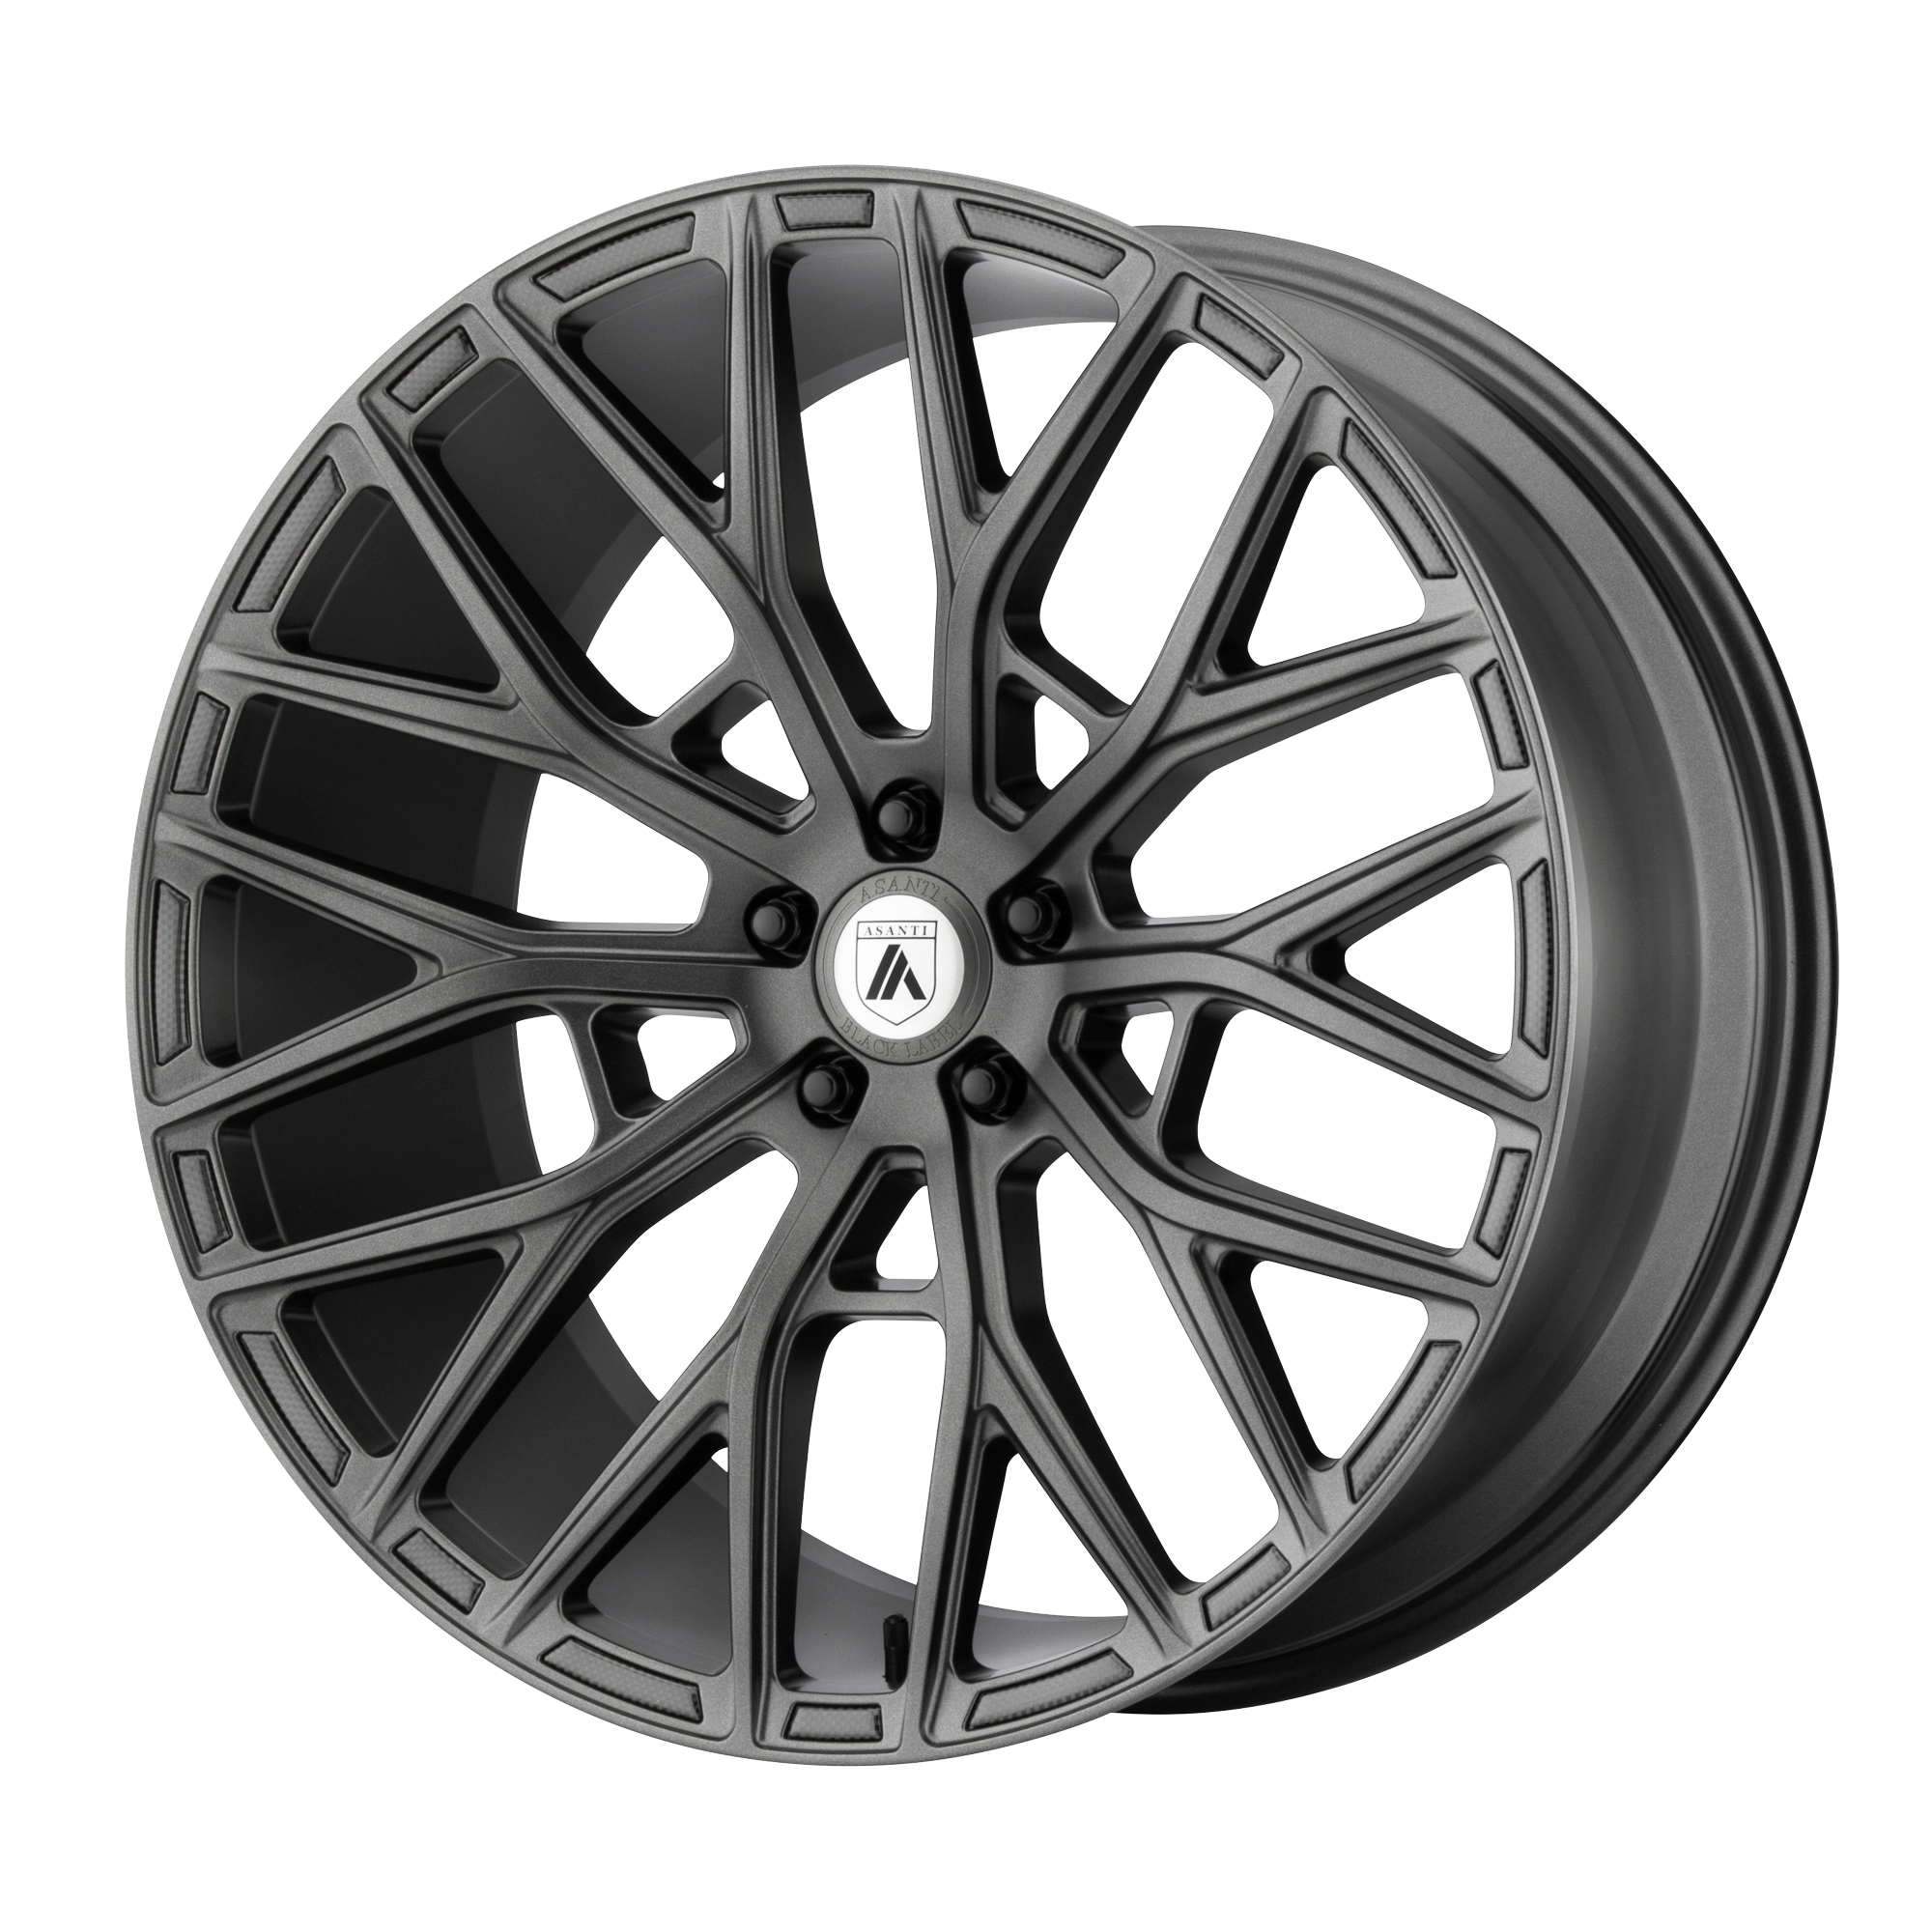 LEO 20x10.5 Blank MATTE GRAPHITE (38 mm) - Tires and Engine Performance